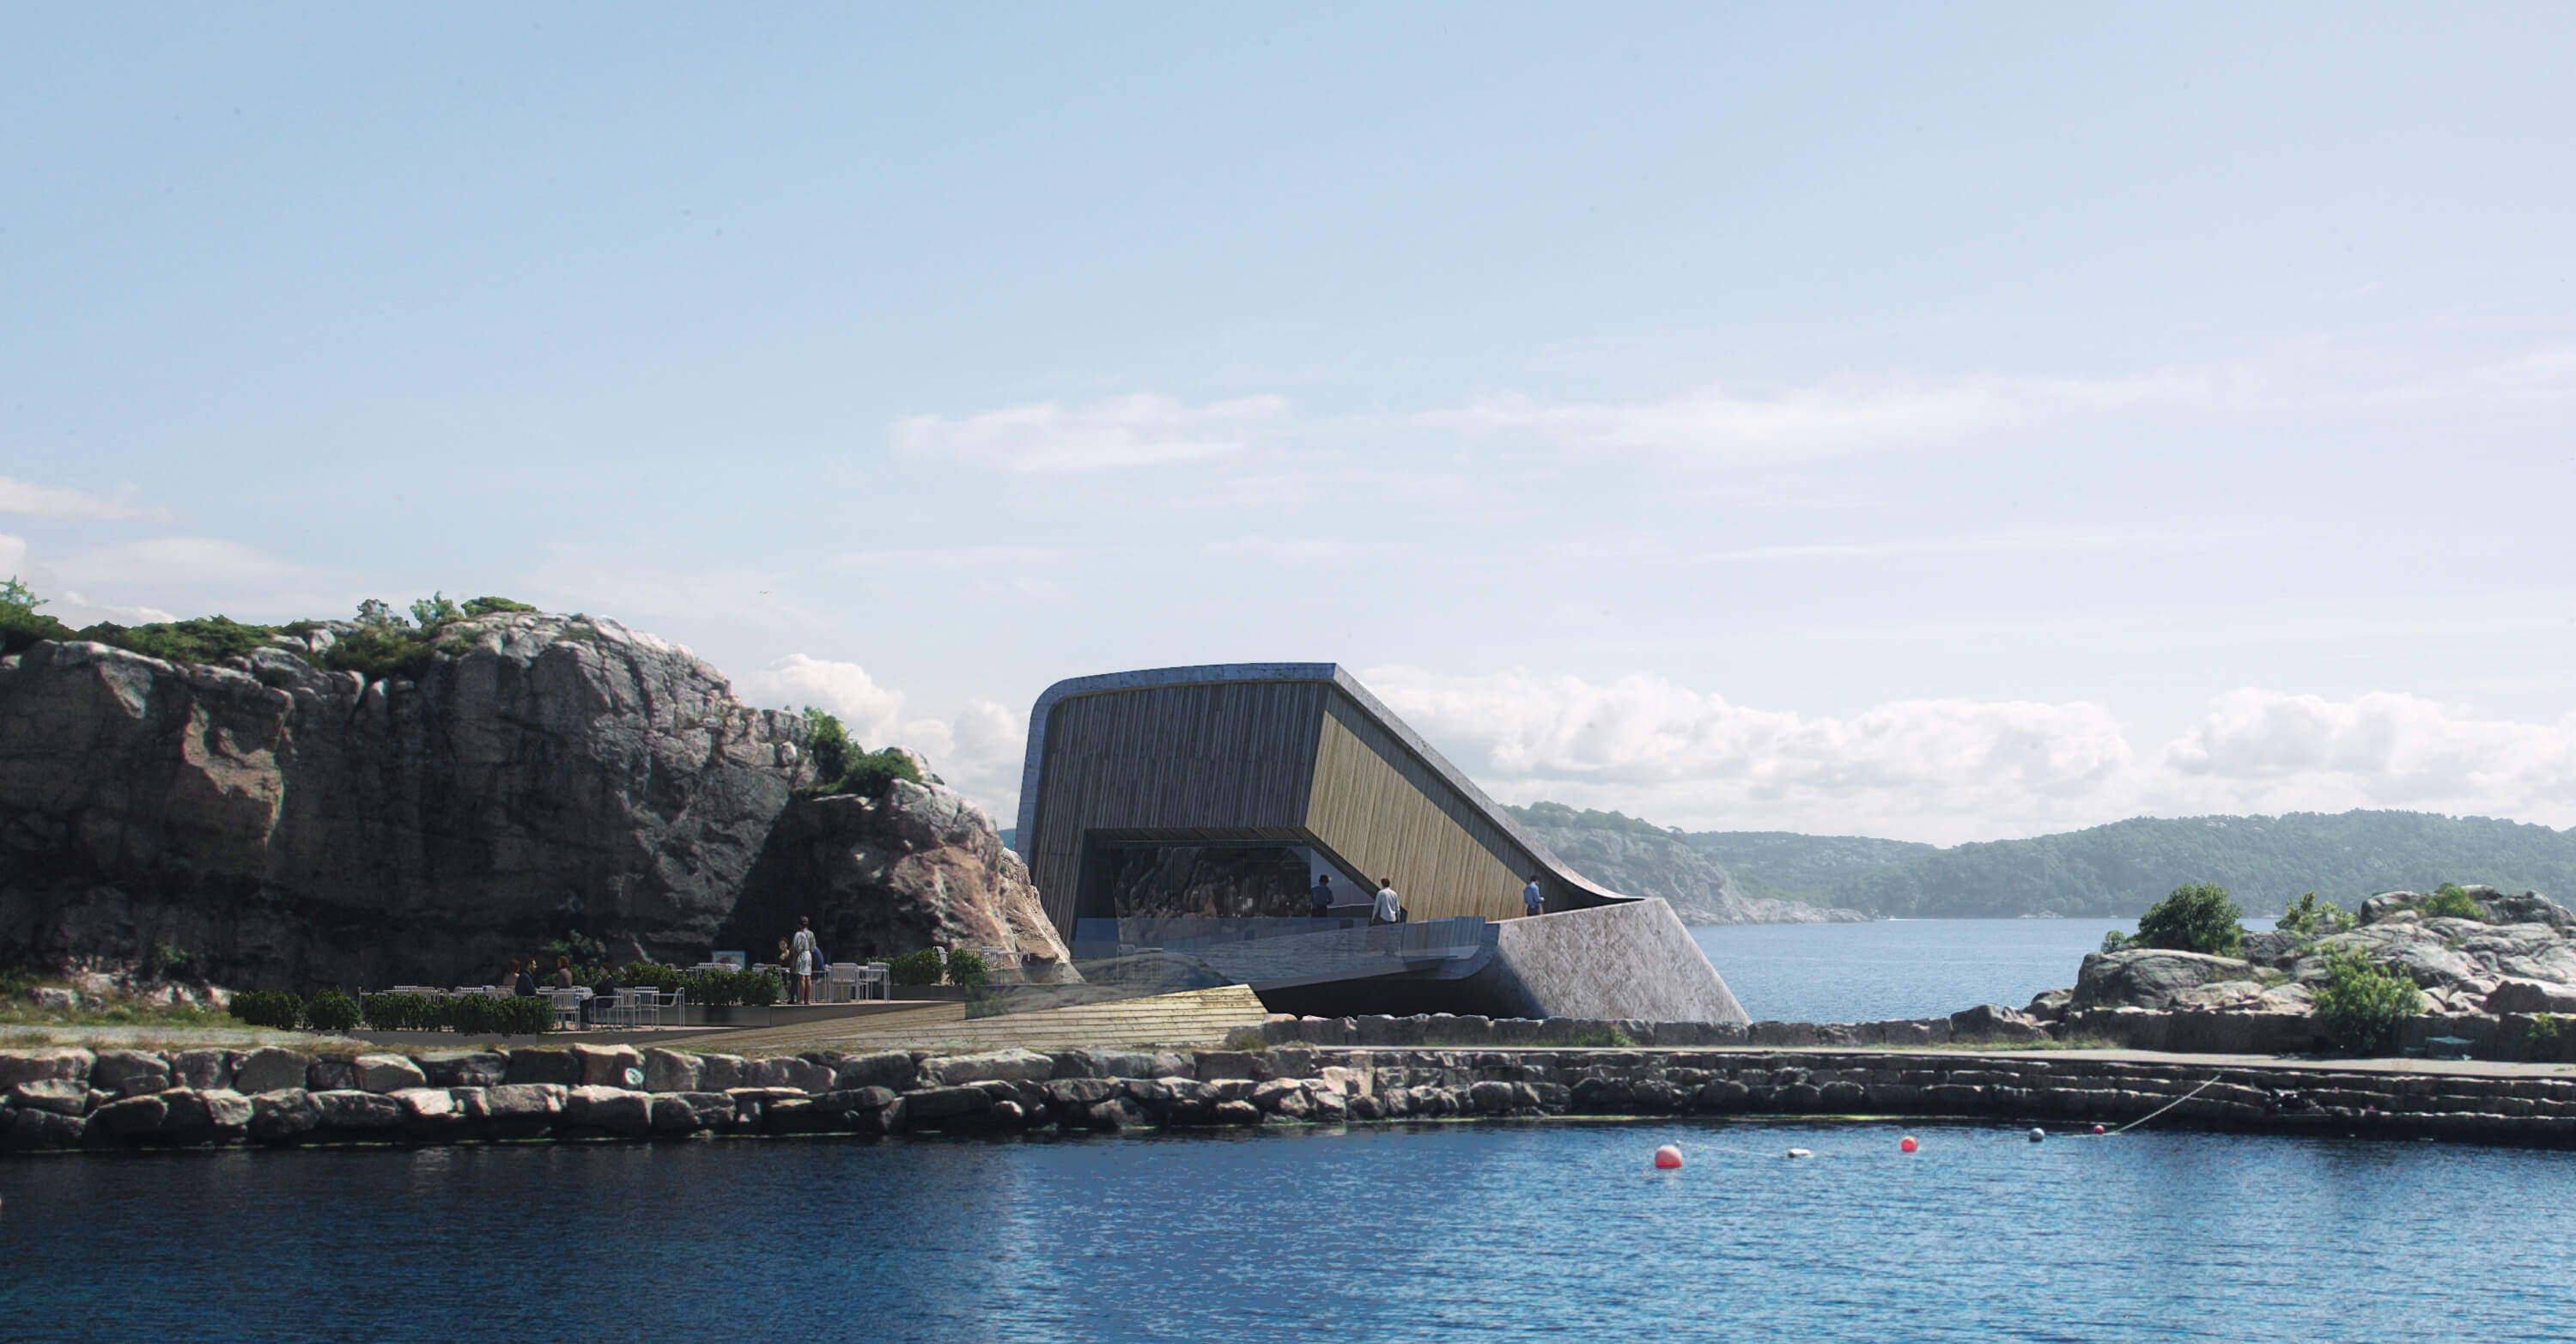 Get the first look at Europe's first restaurant under the sea in Norway